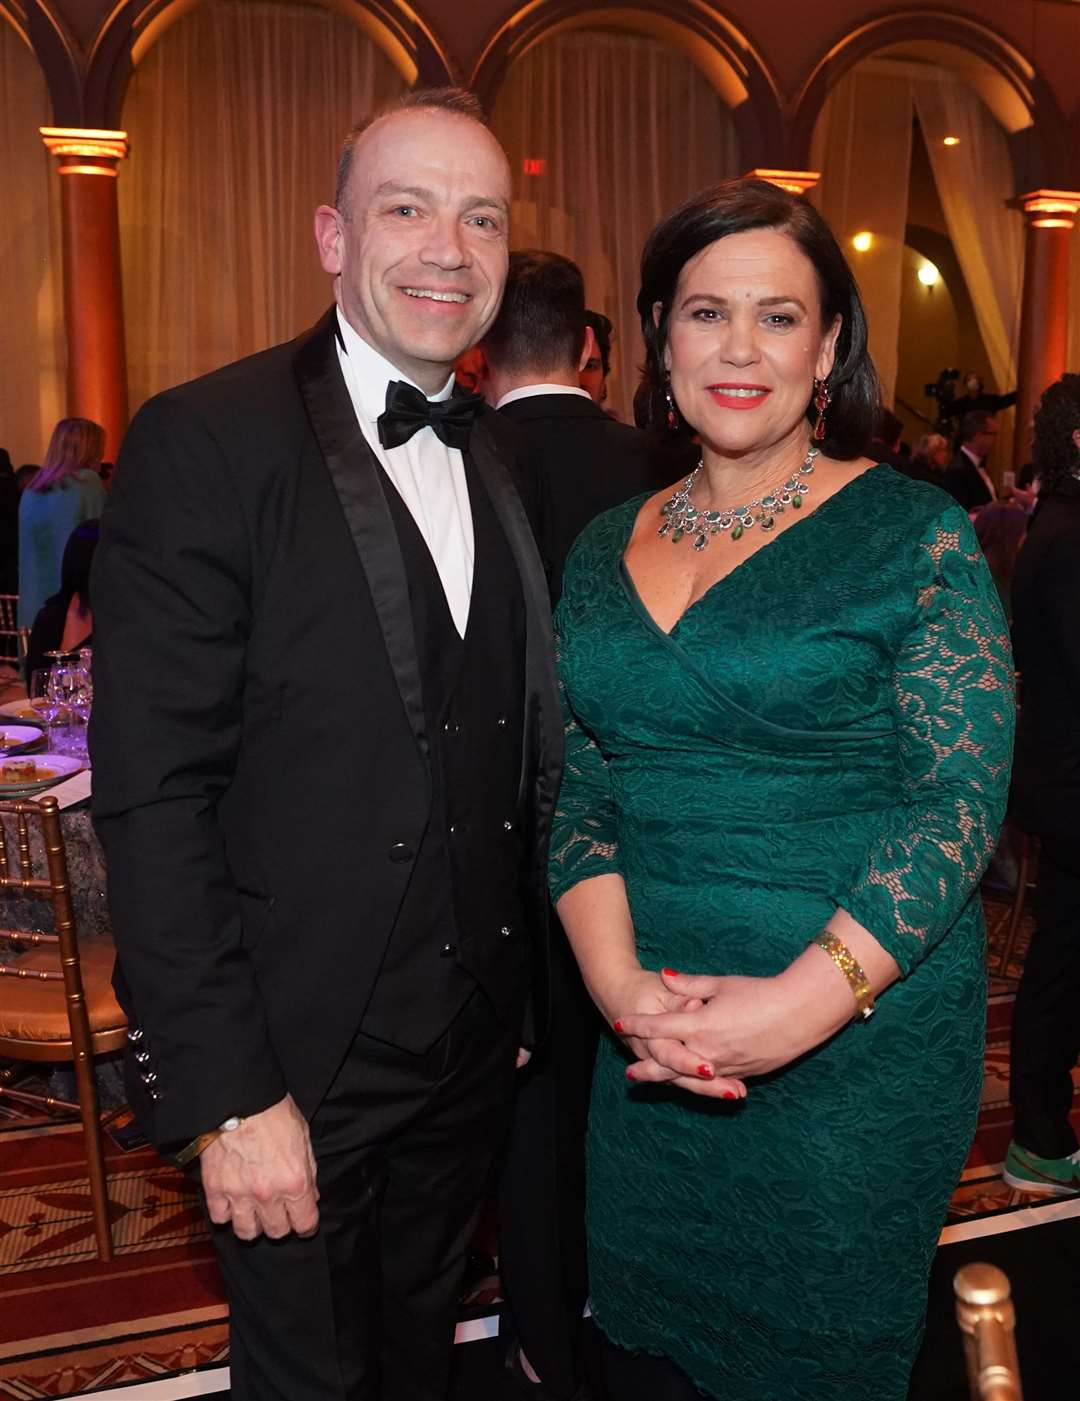 Northern Ireland Secretary Chris Heaton-Harris and Sinn Fein Leader Mary Lou McDonald at the Ireland Fund’s 31st National Gala at the National Building Museum, in Washington, DC, during the Taoiseach’s visit to the US for St Patrick’s Day (Niall Carson/PA)